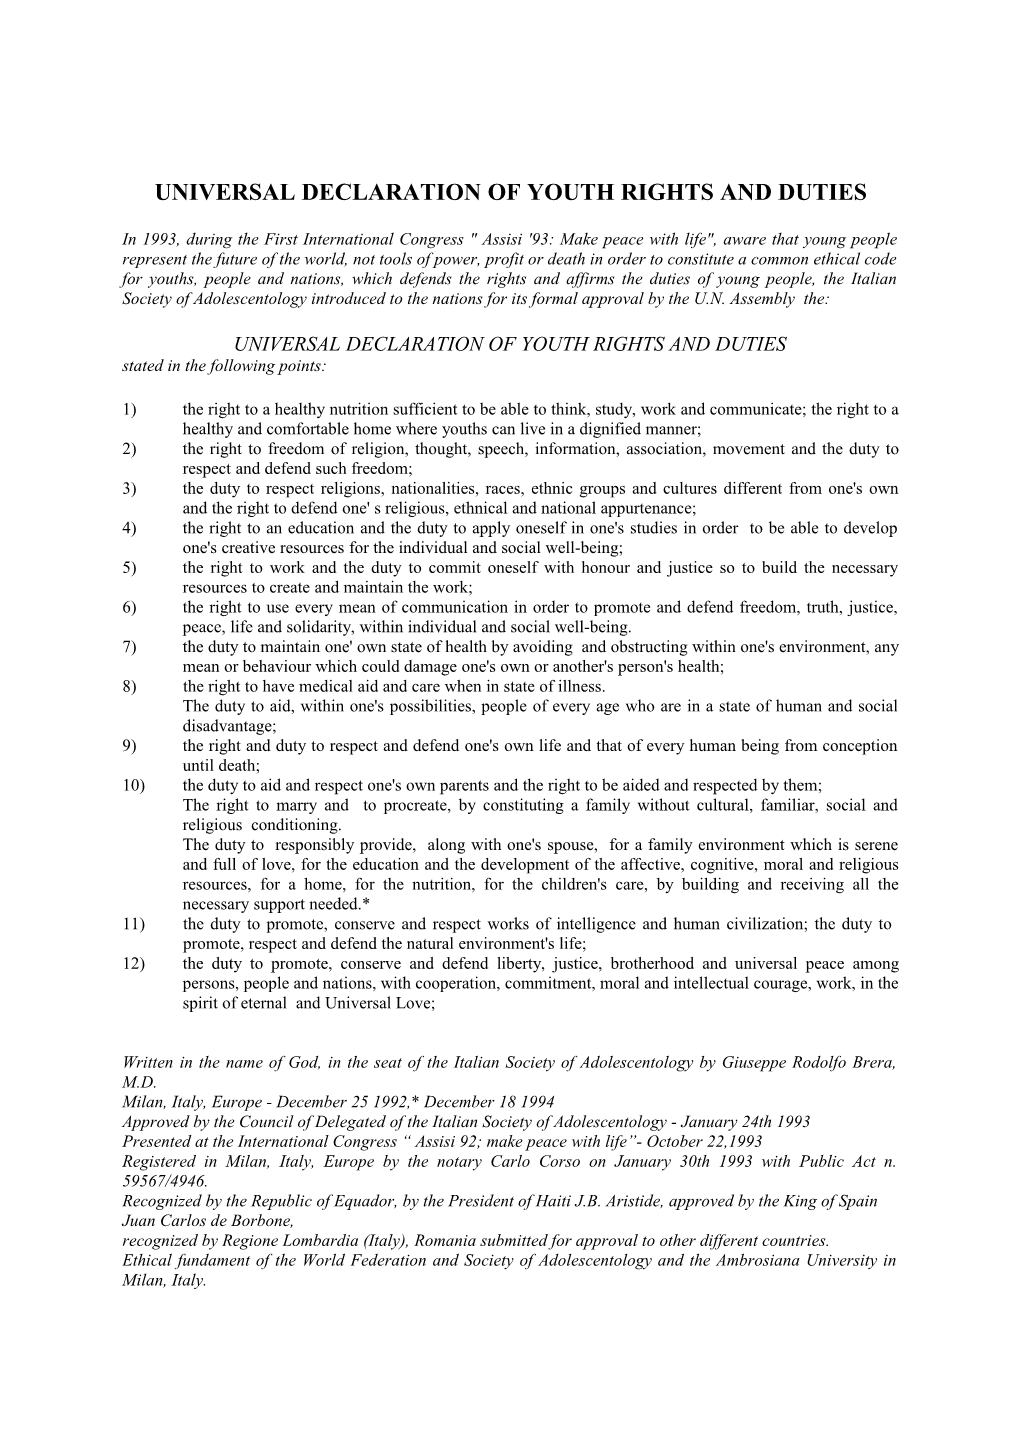 Universal Declaration of Youth Rights and Duties